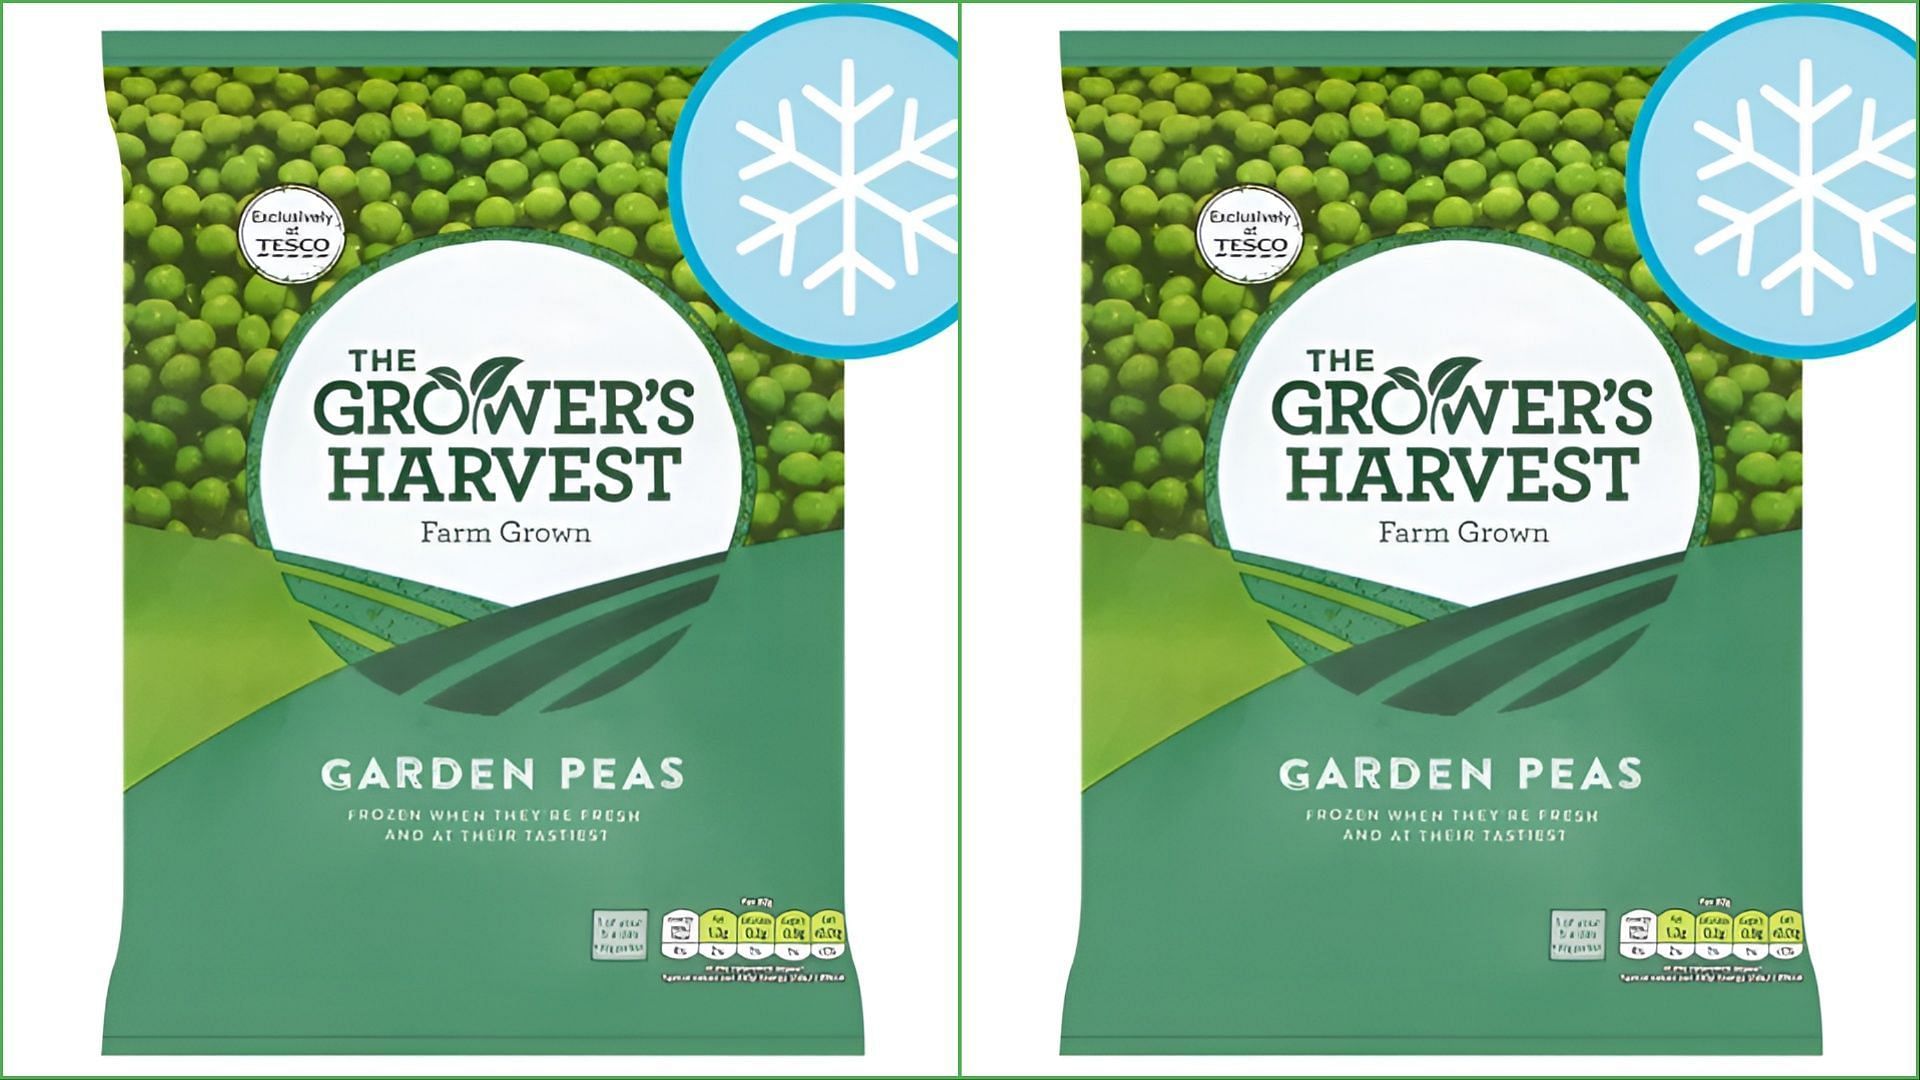 The recalled Growers Harvest Garden Peas were only available in 900-gram bags (Image via Tesco)